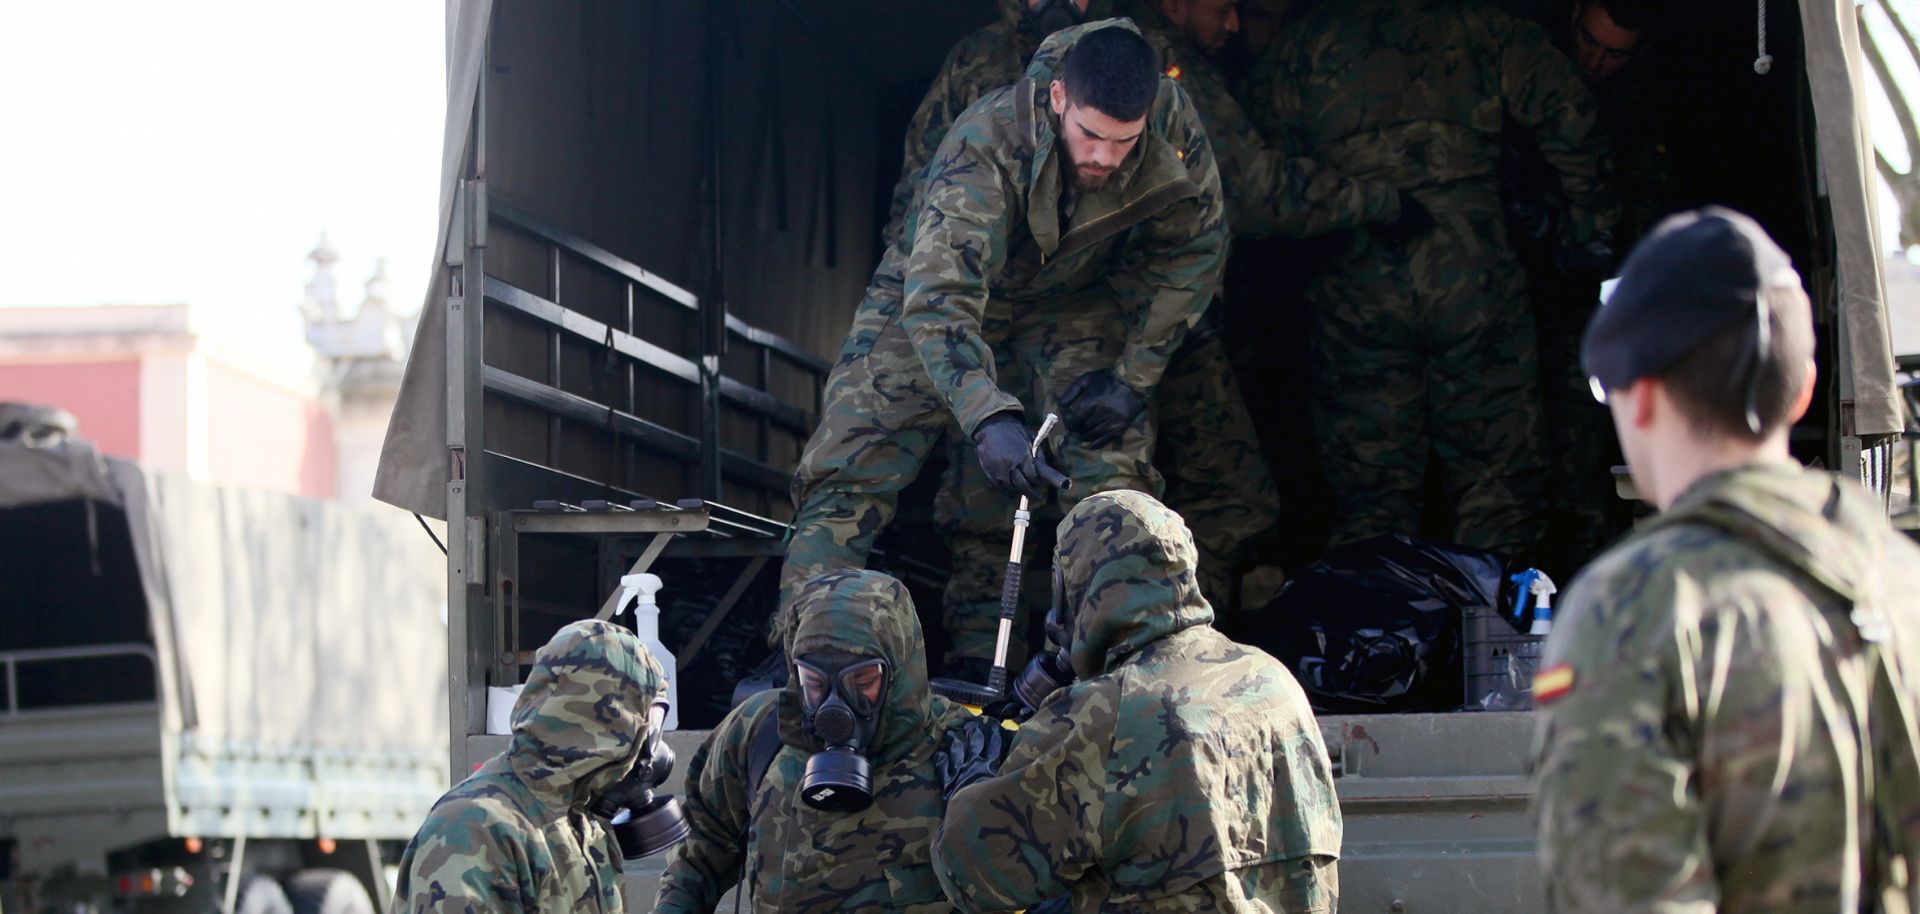 Fully protected members of the Spanish Army's Nuclear Bacteriological and Chemical Regiment (RNBQ) prepare to disinfect a train station in San Sebastian to prevent the spread of the coronavirus on March 24, 2020. 